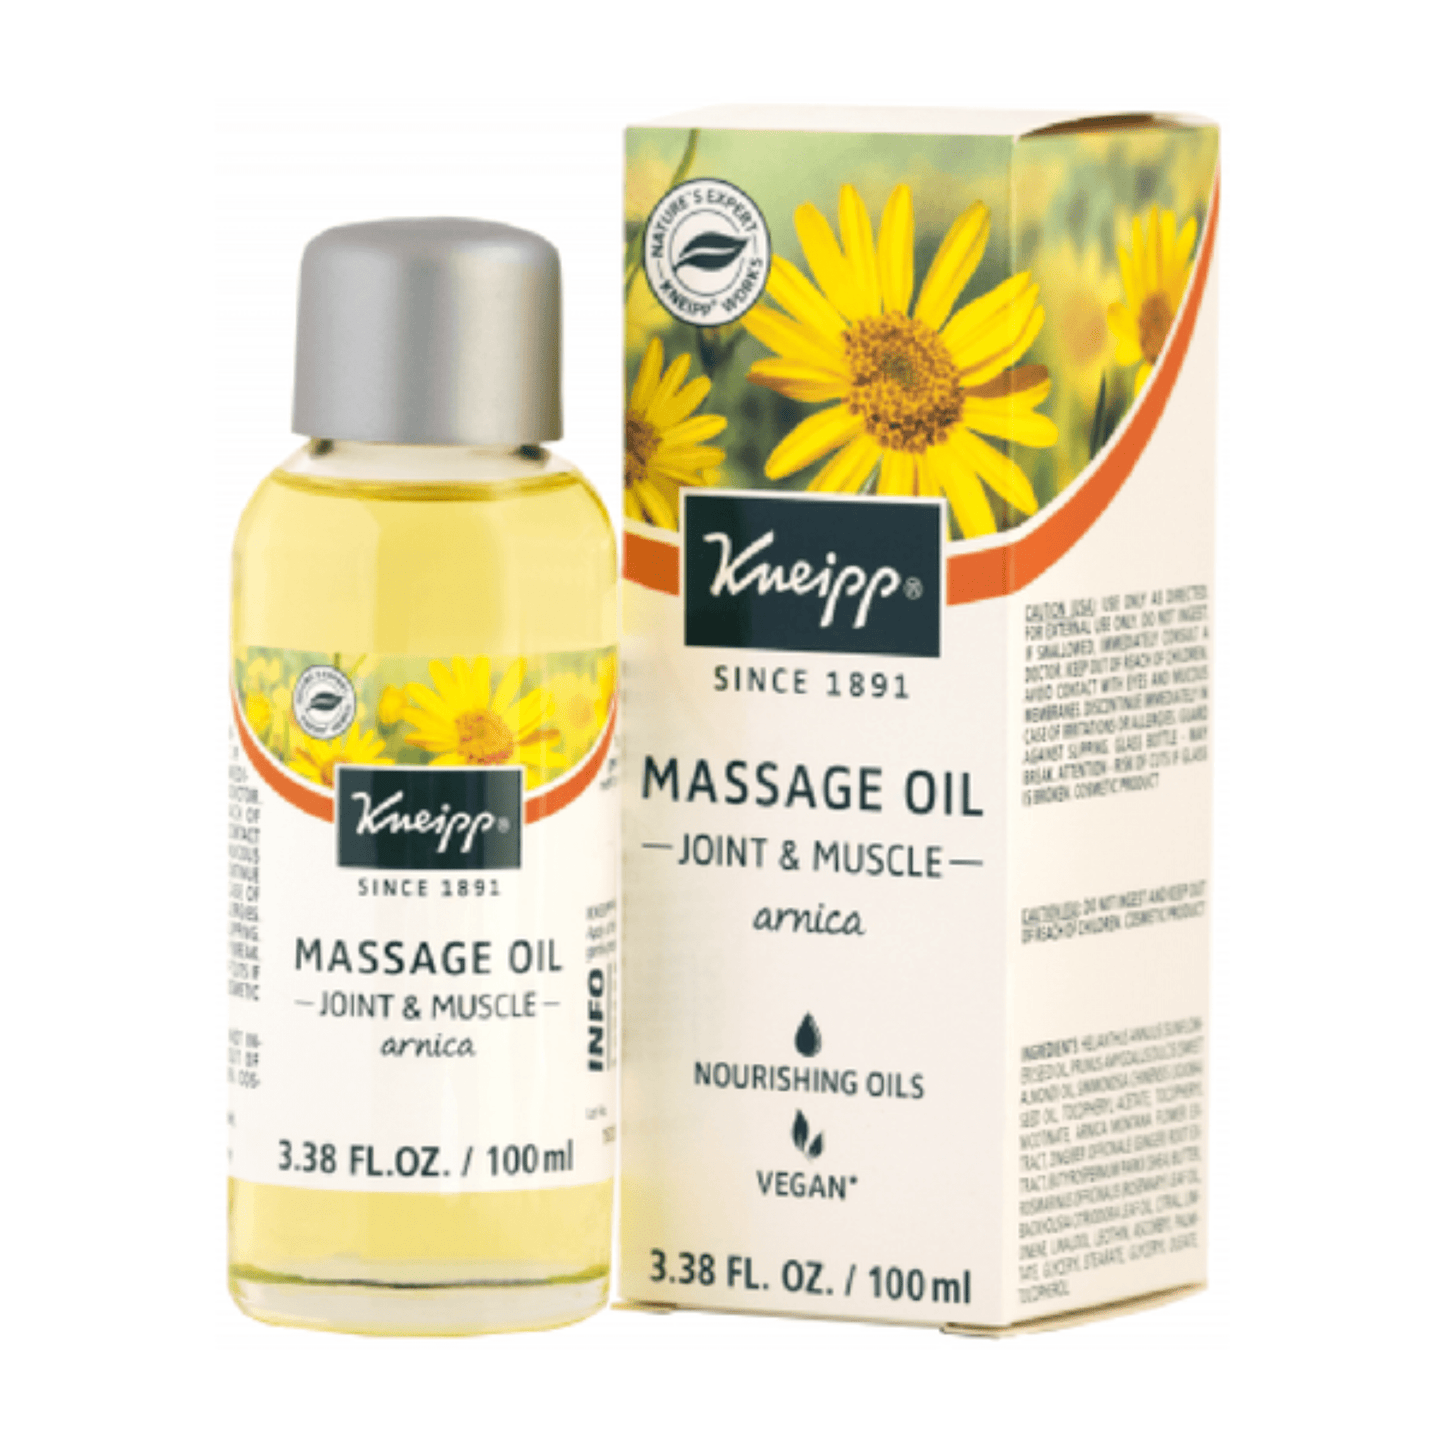 Primary Image of Arnica Joint & Muscle Massage Oil